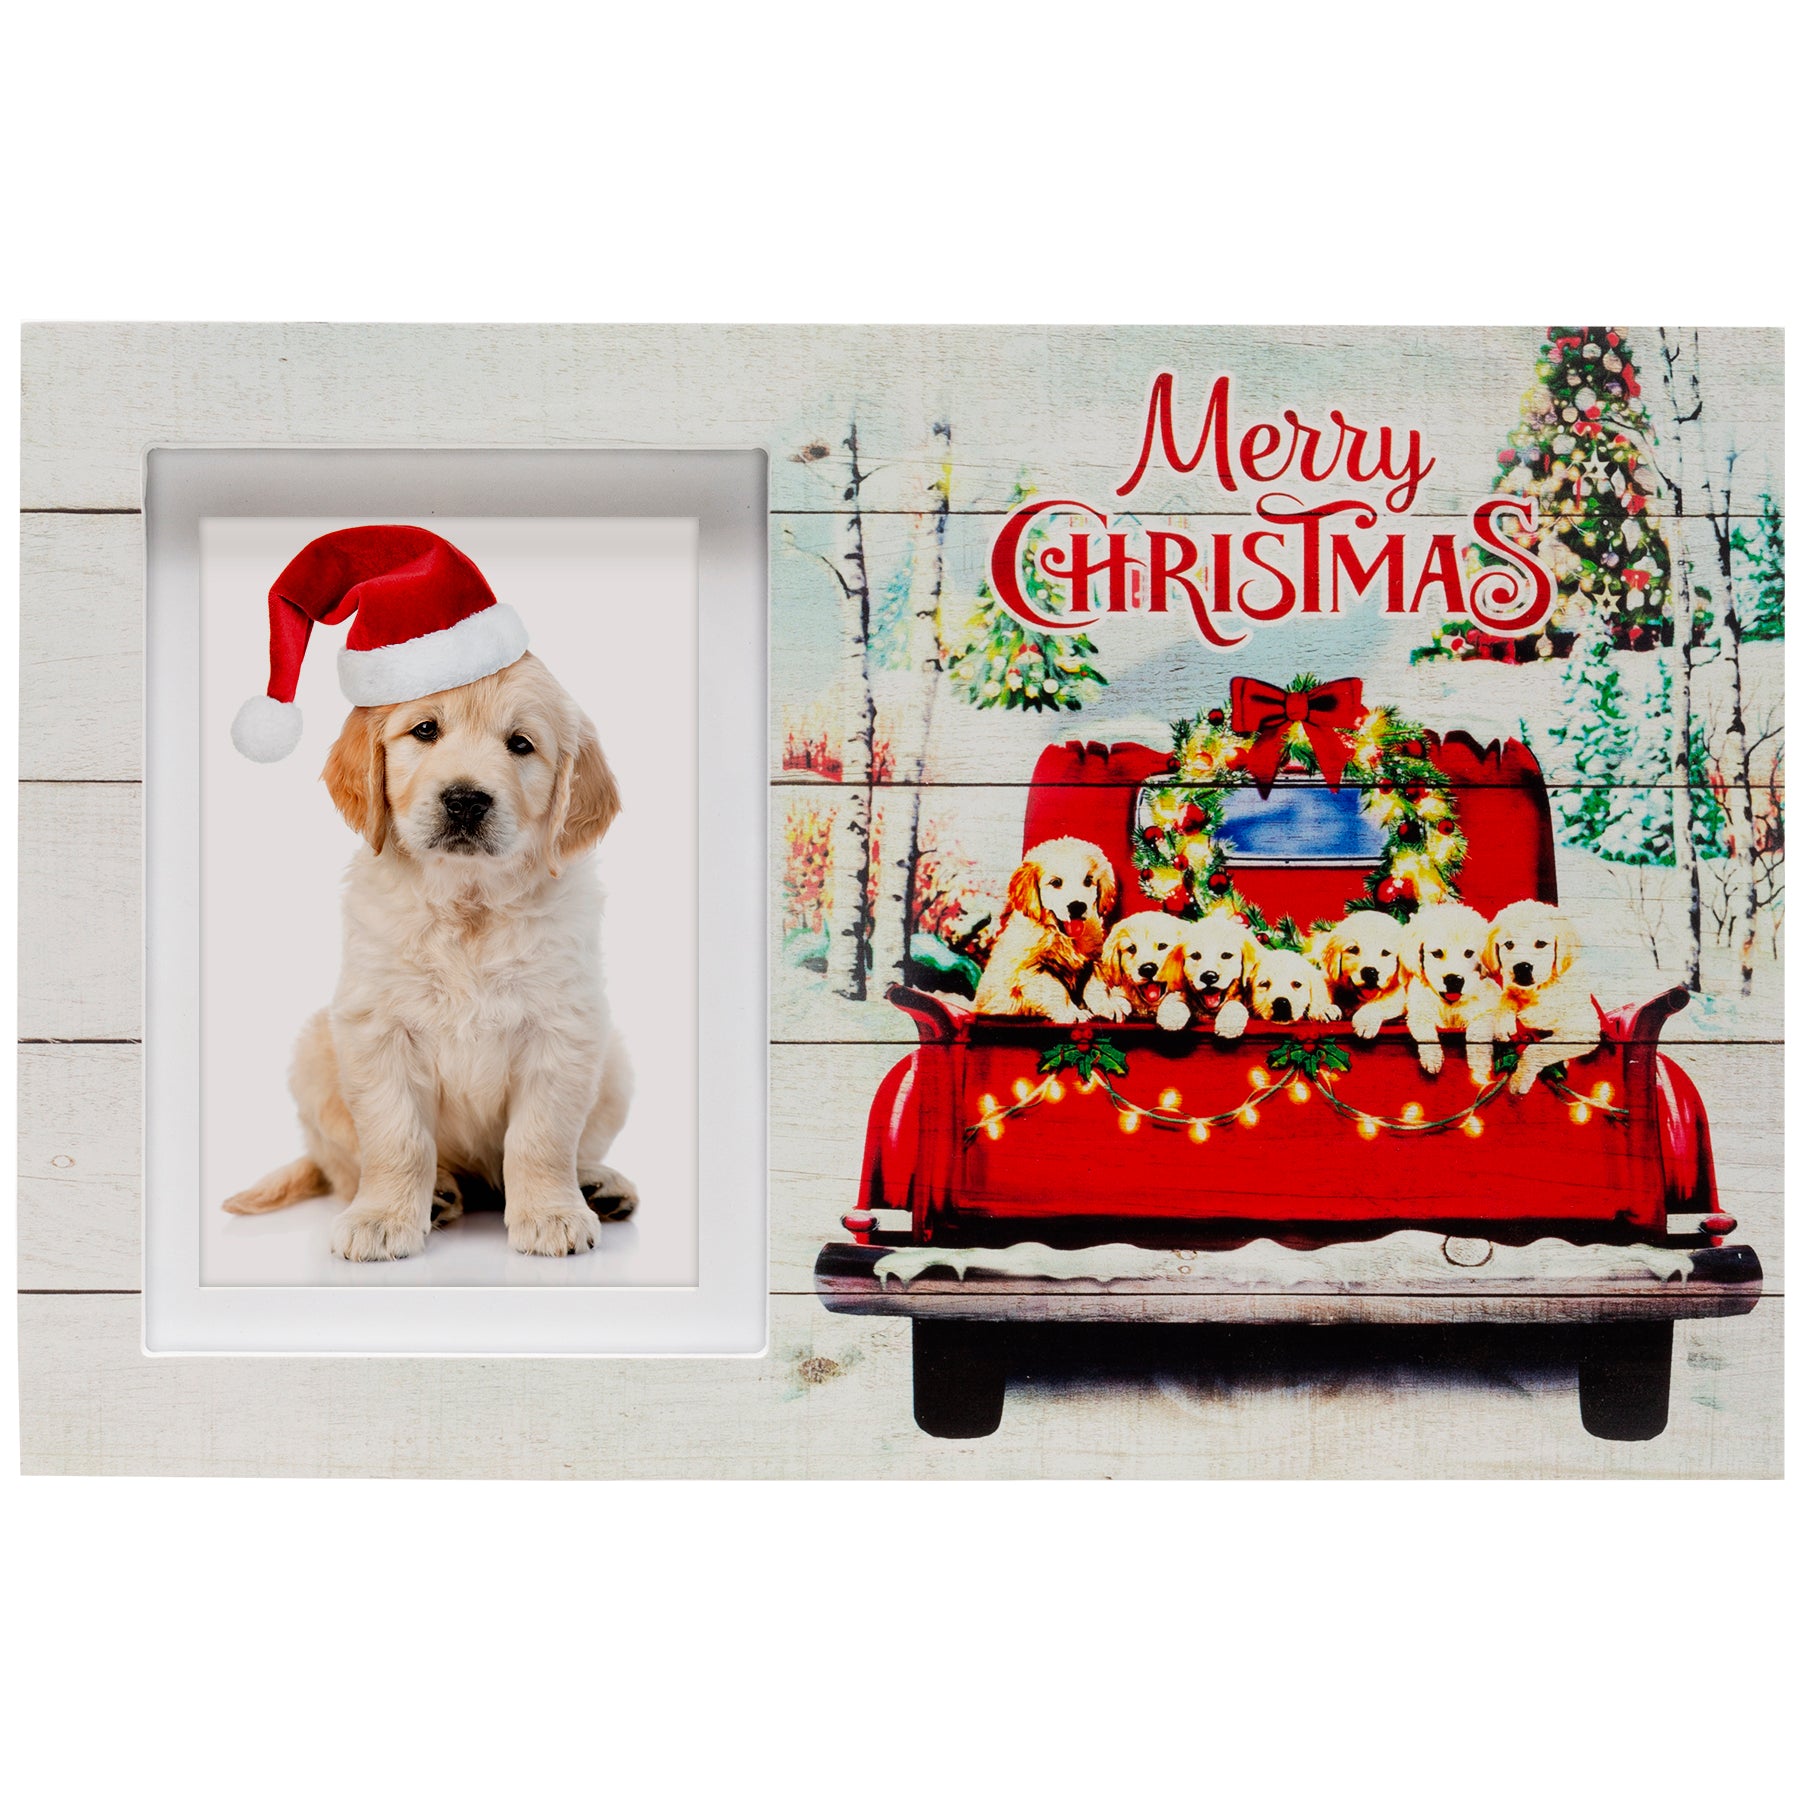 Merry Christmas Puppies Wood Picture Frame